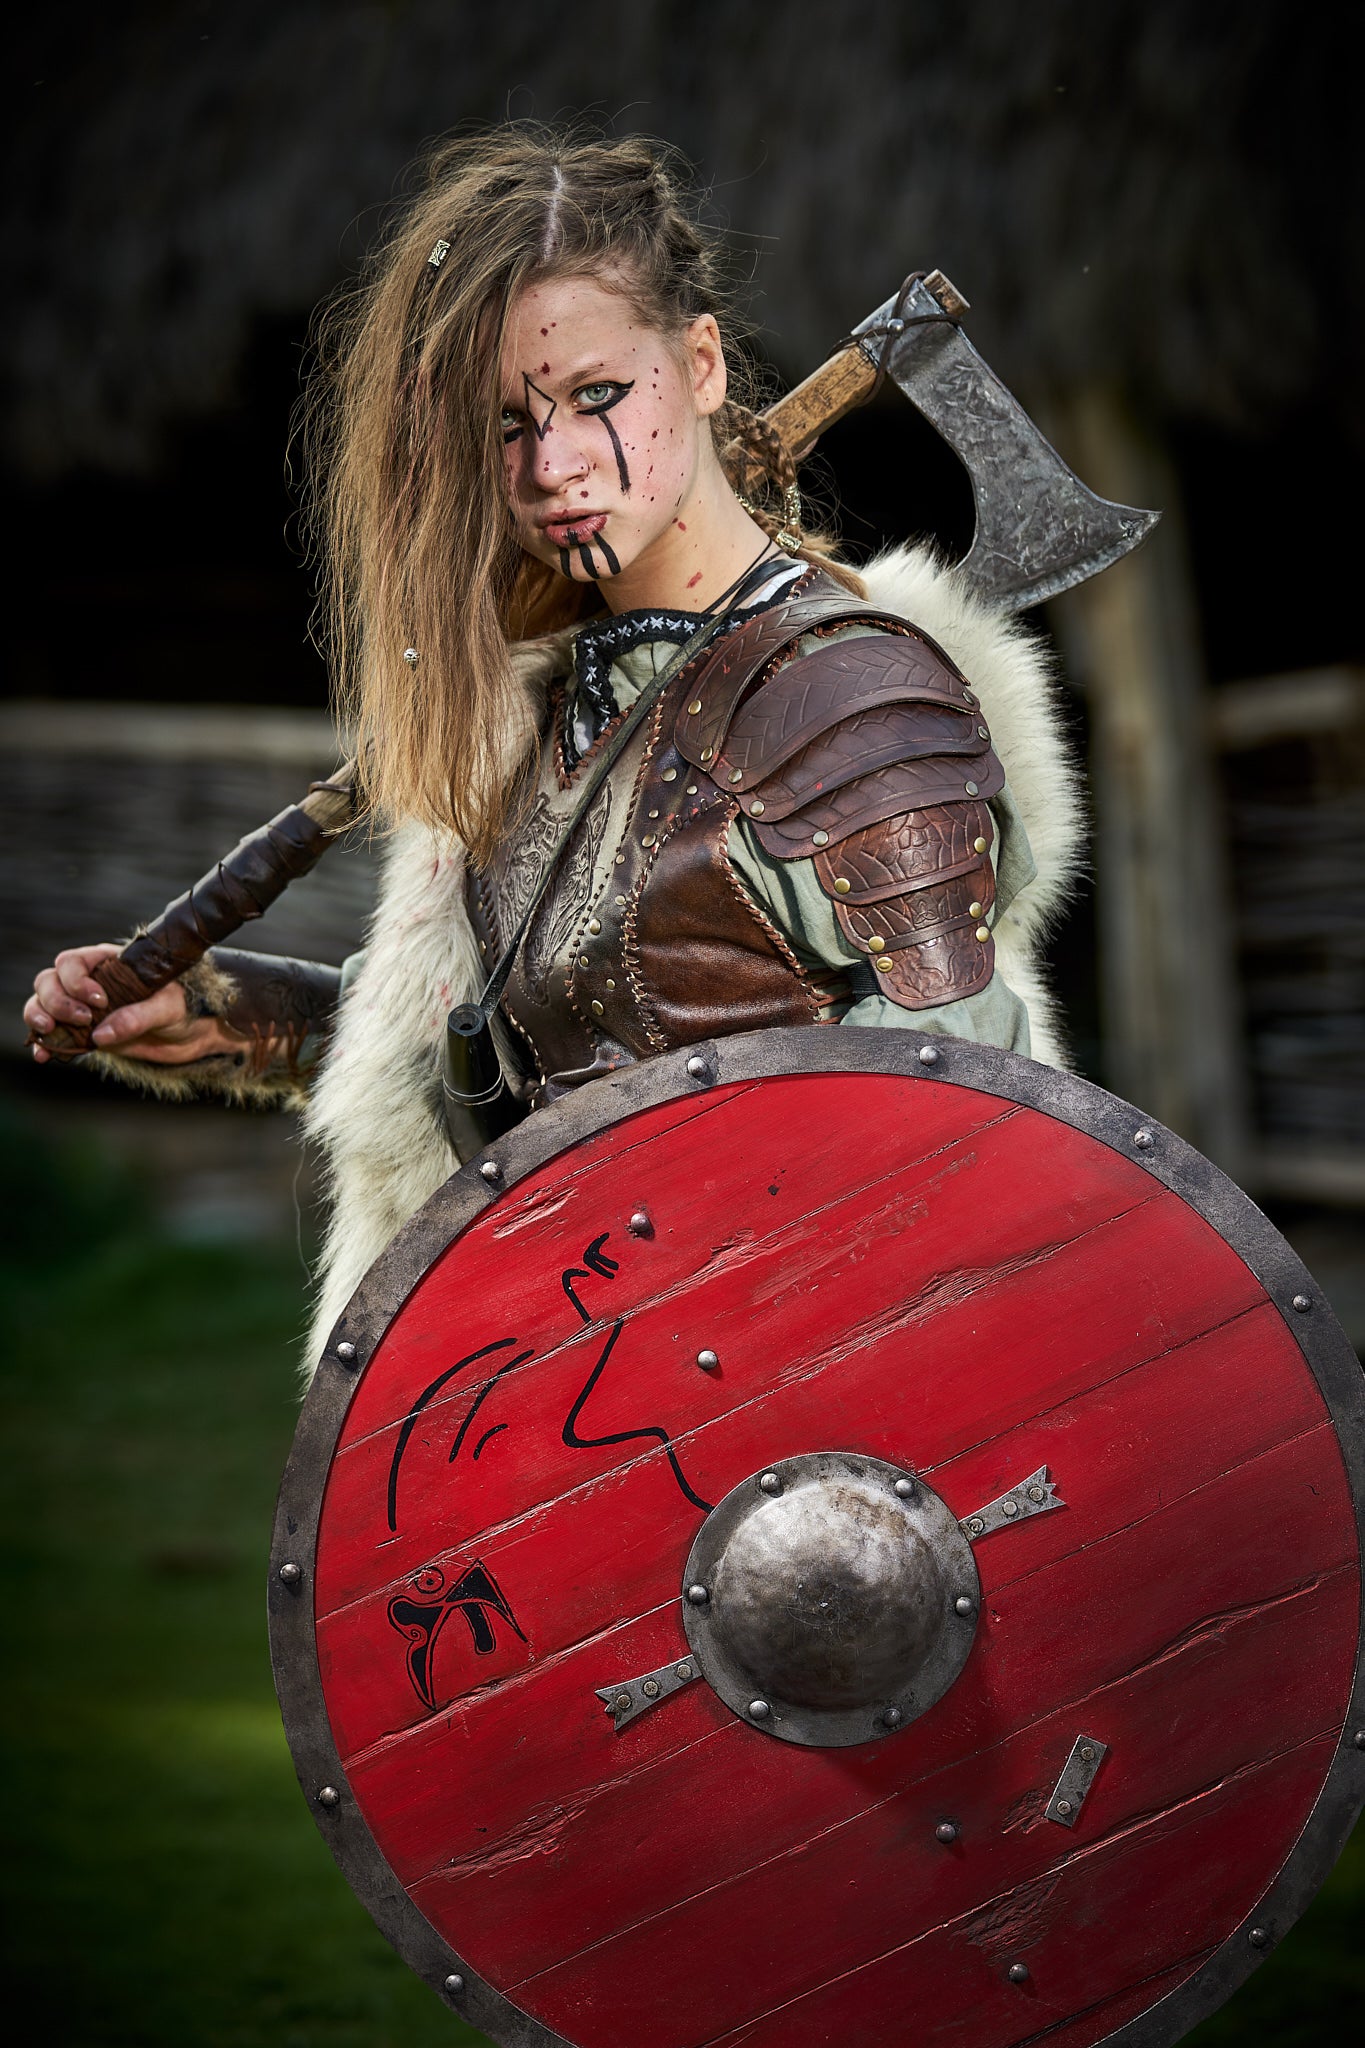 I made my little girl a shieldmaiden costume from wood, brass